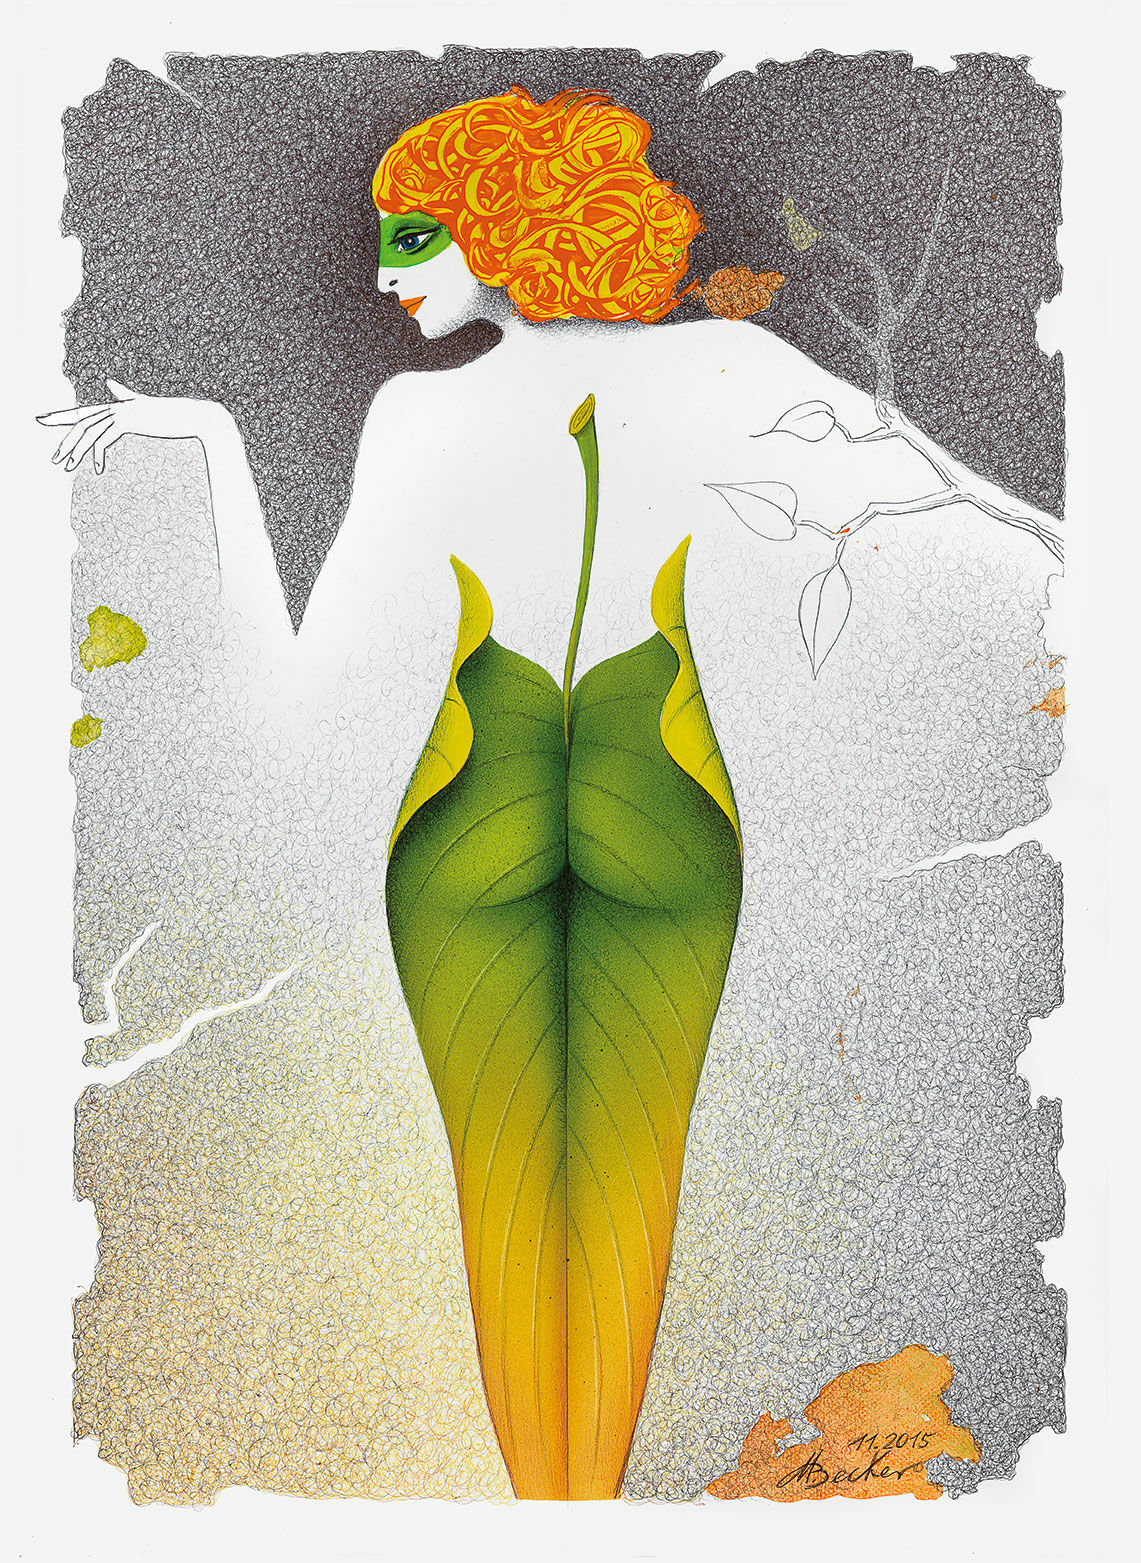 Picture "Leaf Figure" (2015), unframed by Michael Becker